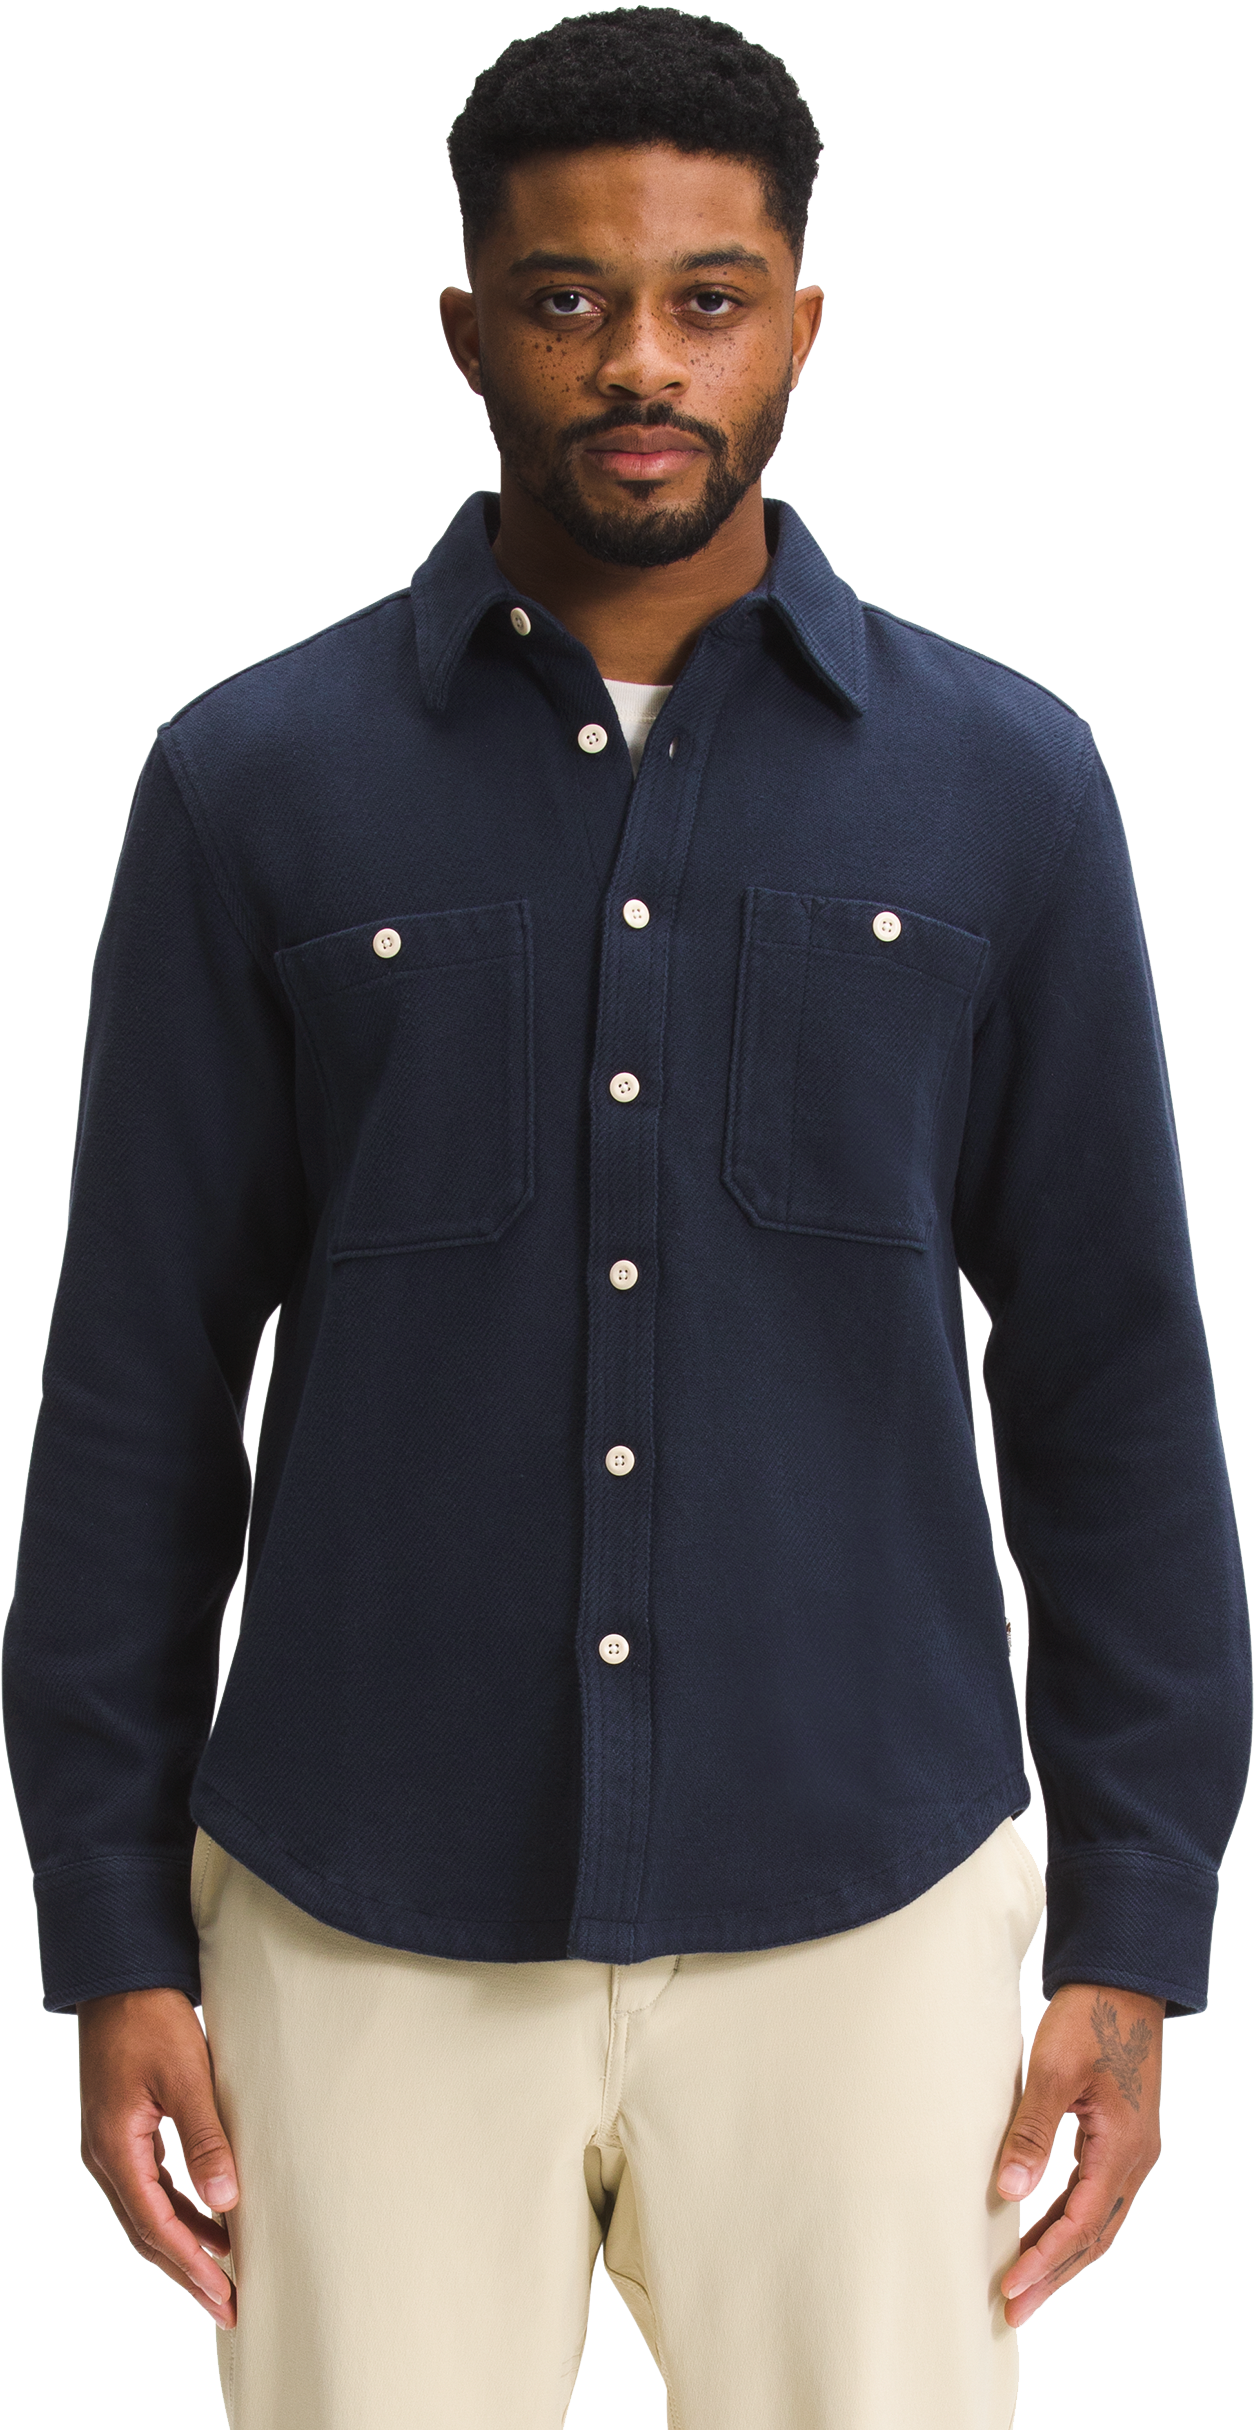 The North Face Valley Twill Flannel Long-Sleeve Shirt for Men - Aviator Navy - XL